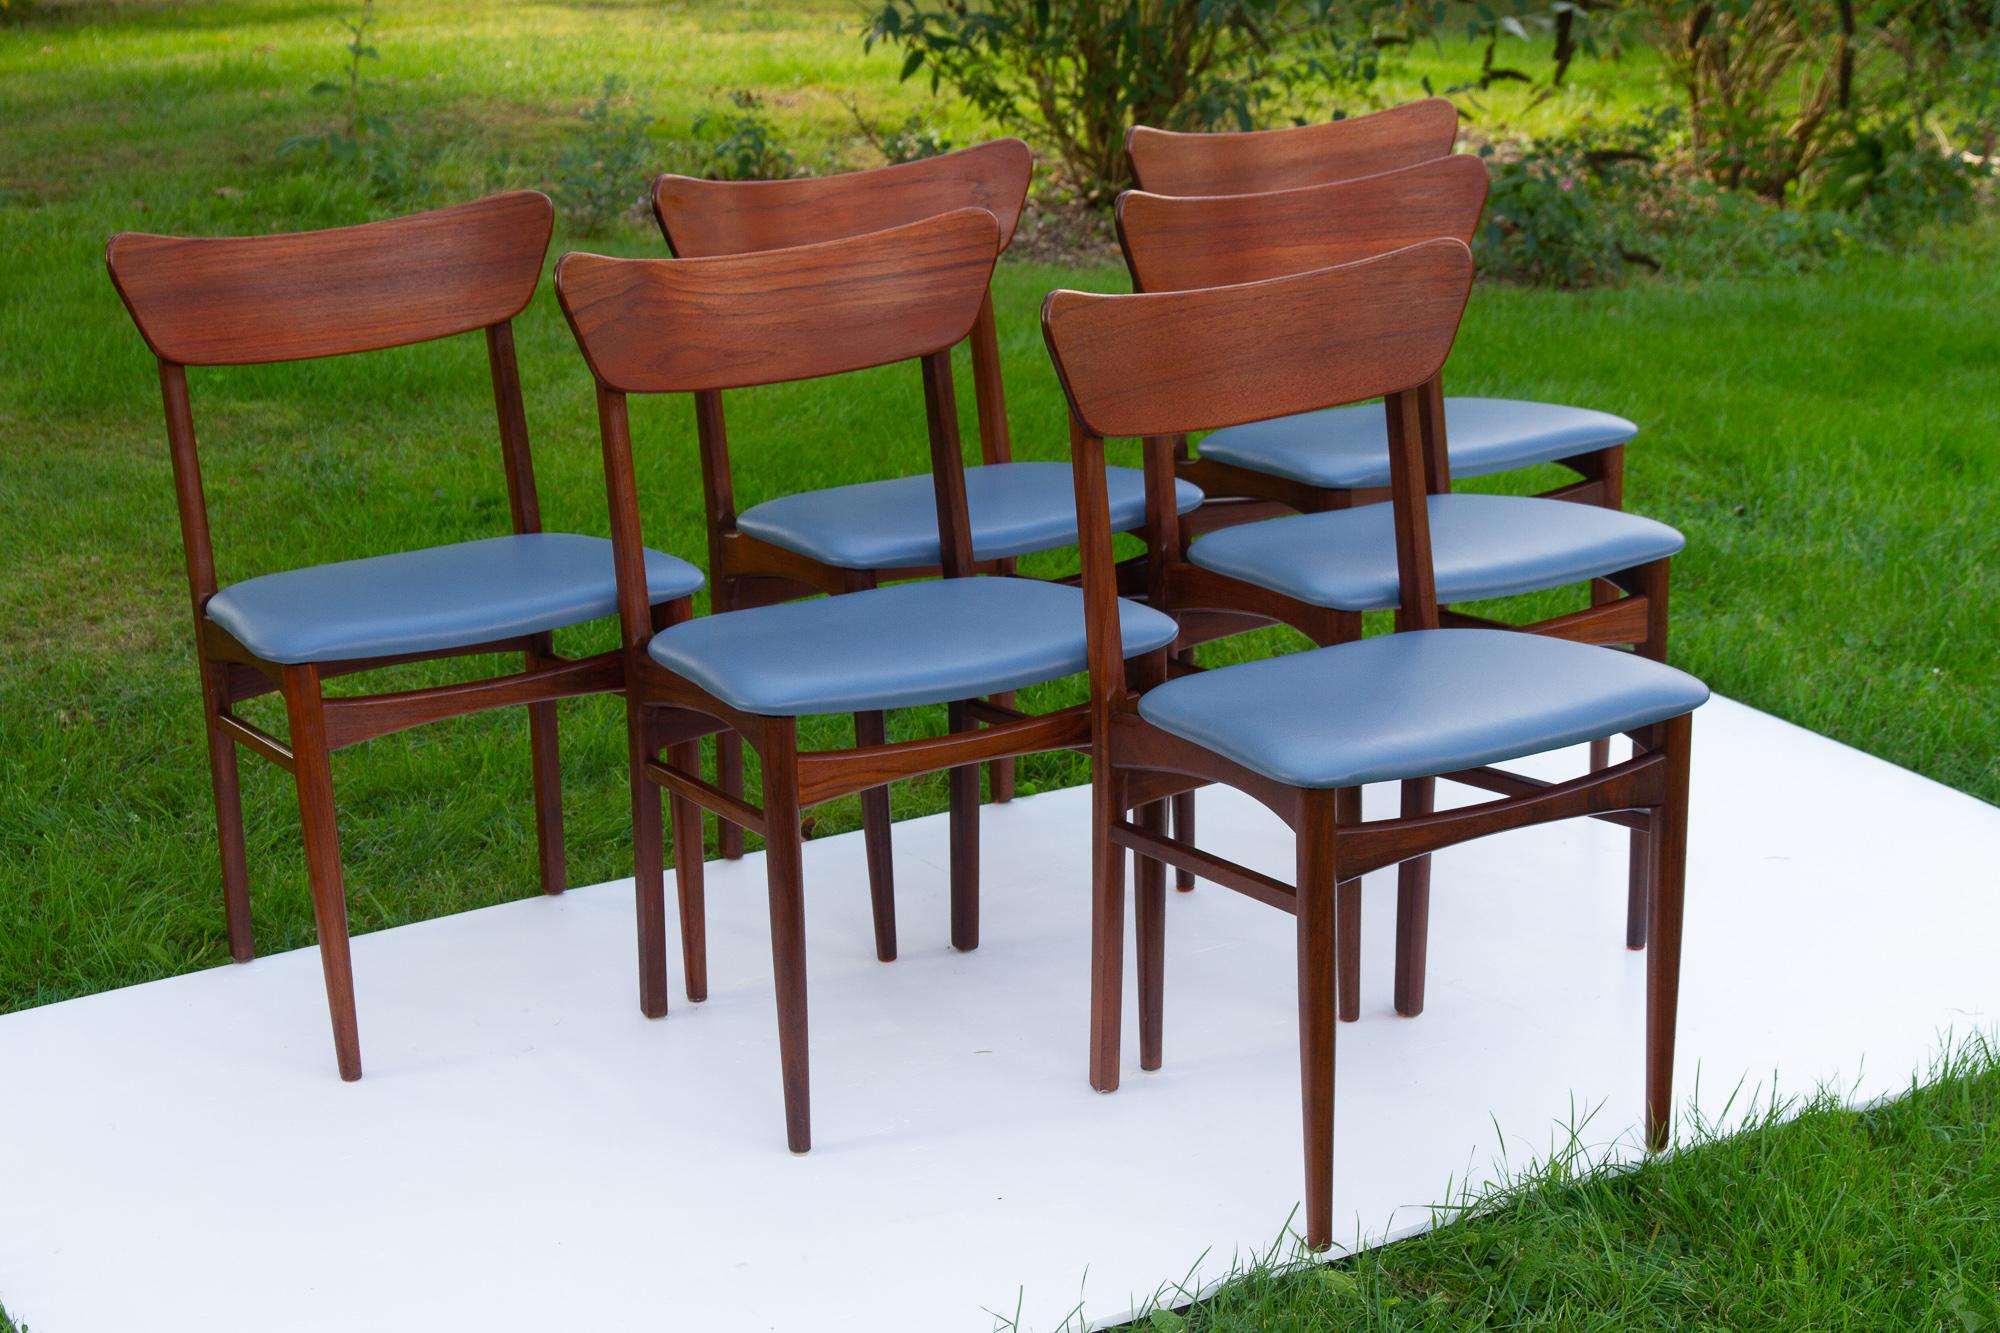 Vintage Danish Teak dining chairs 1960s, Set of 6
Set of six Danish Scandinavian modern dining room chairs with steel blue/grey leather upholstery. Frame in solid teak with curved backrests and round tapered legs.
Very elegant and comfortable